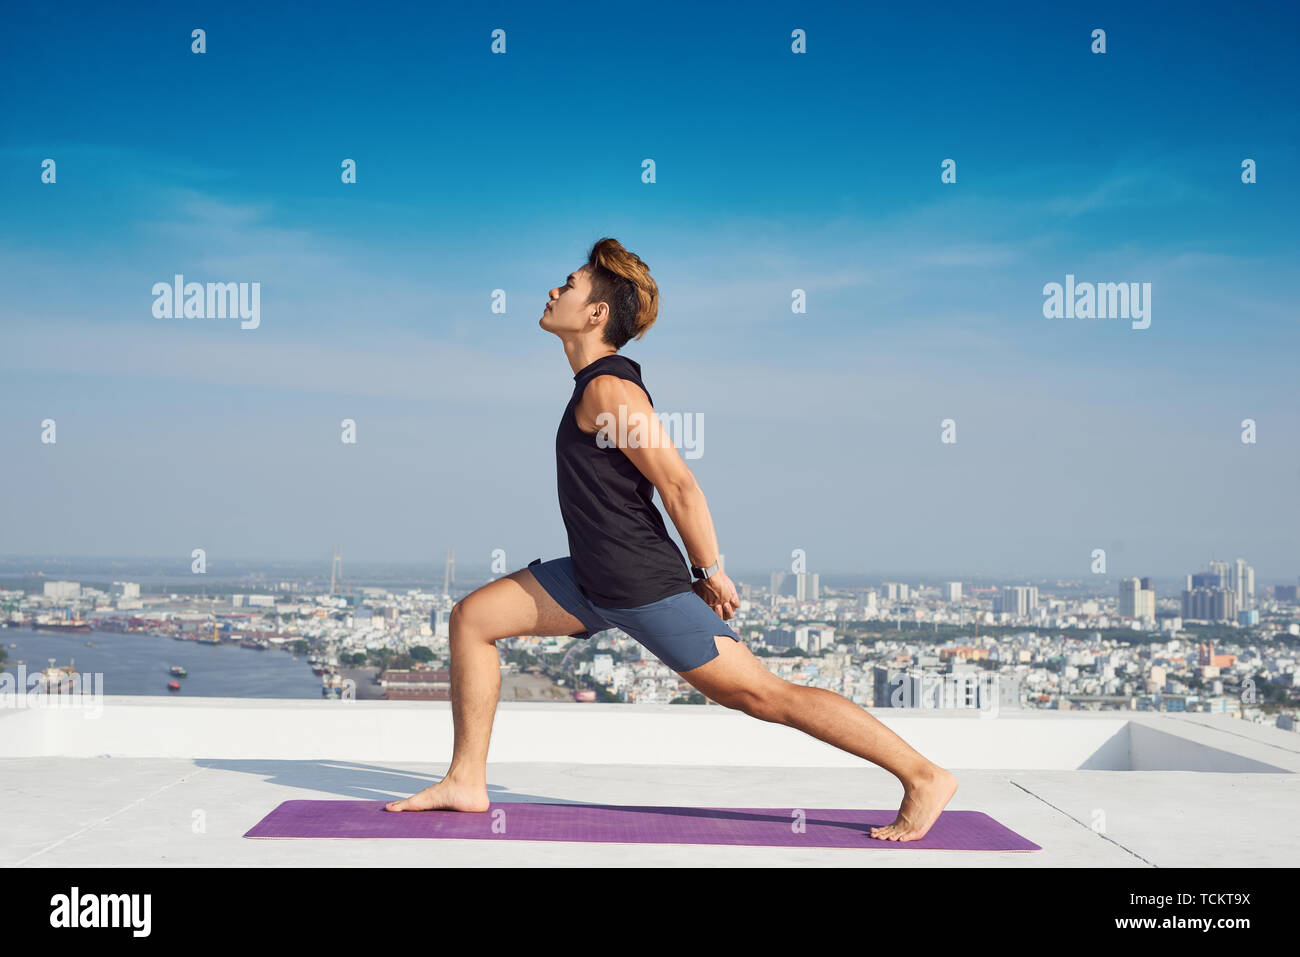 Advanced Yoga Practitioner Woman in Extreme Yoga Pose Stock Photo